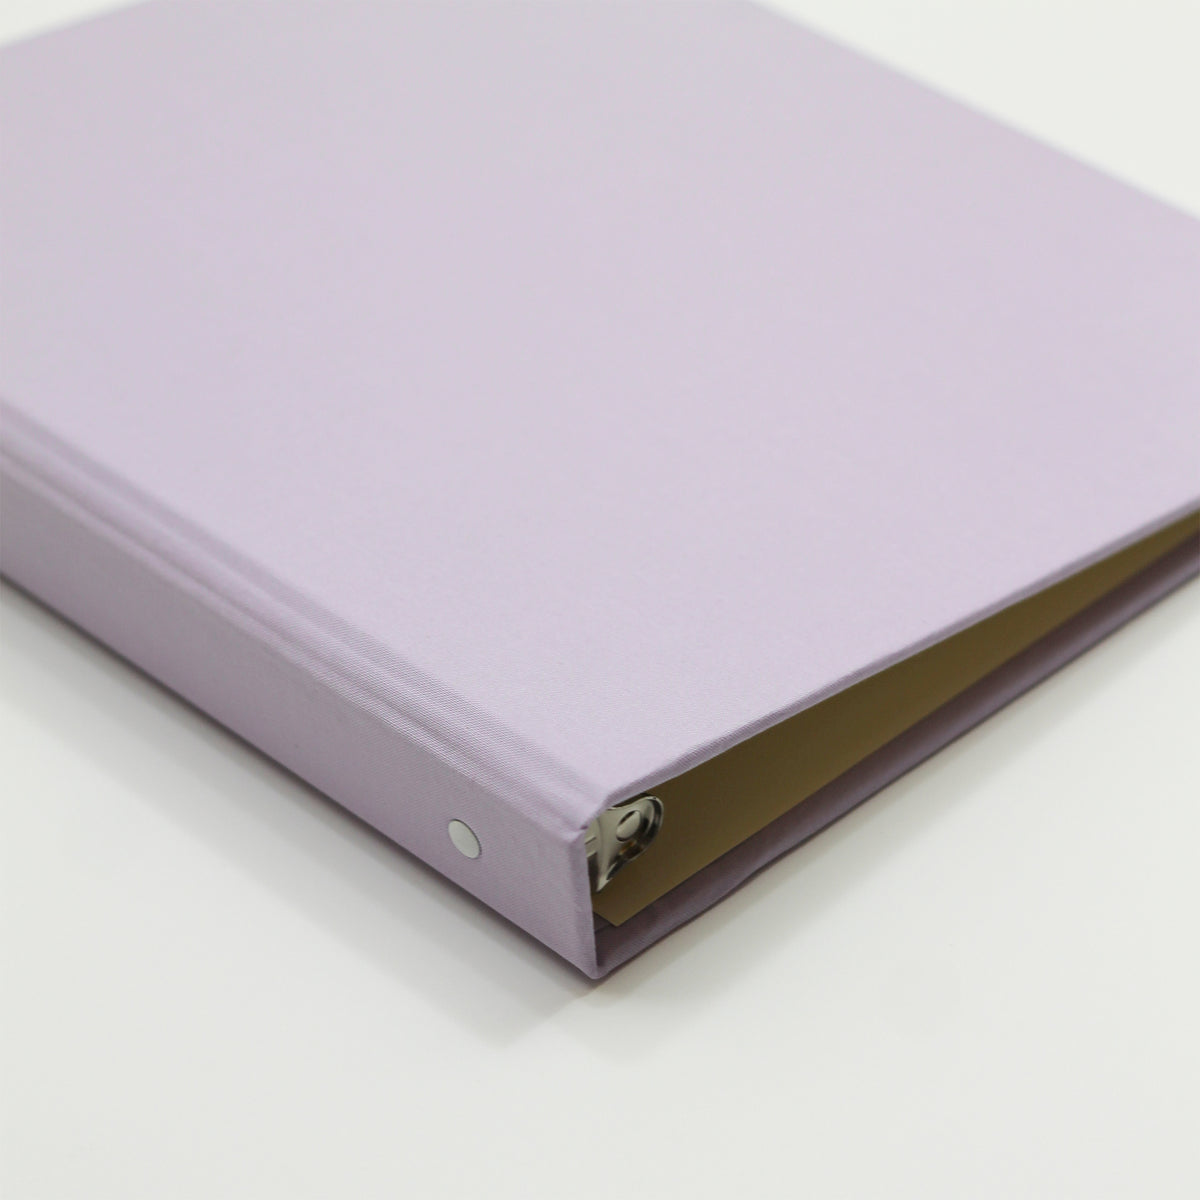 Custom Binder with Lavender Cotton Cover